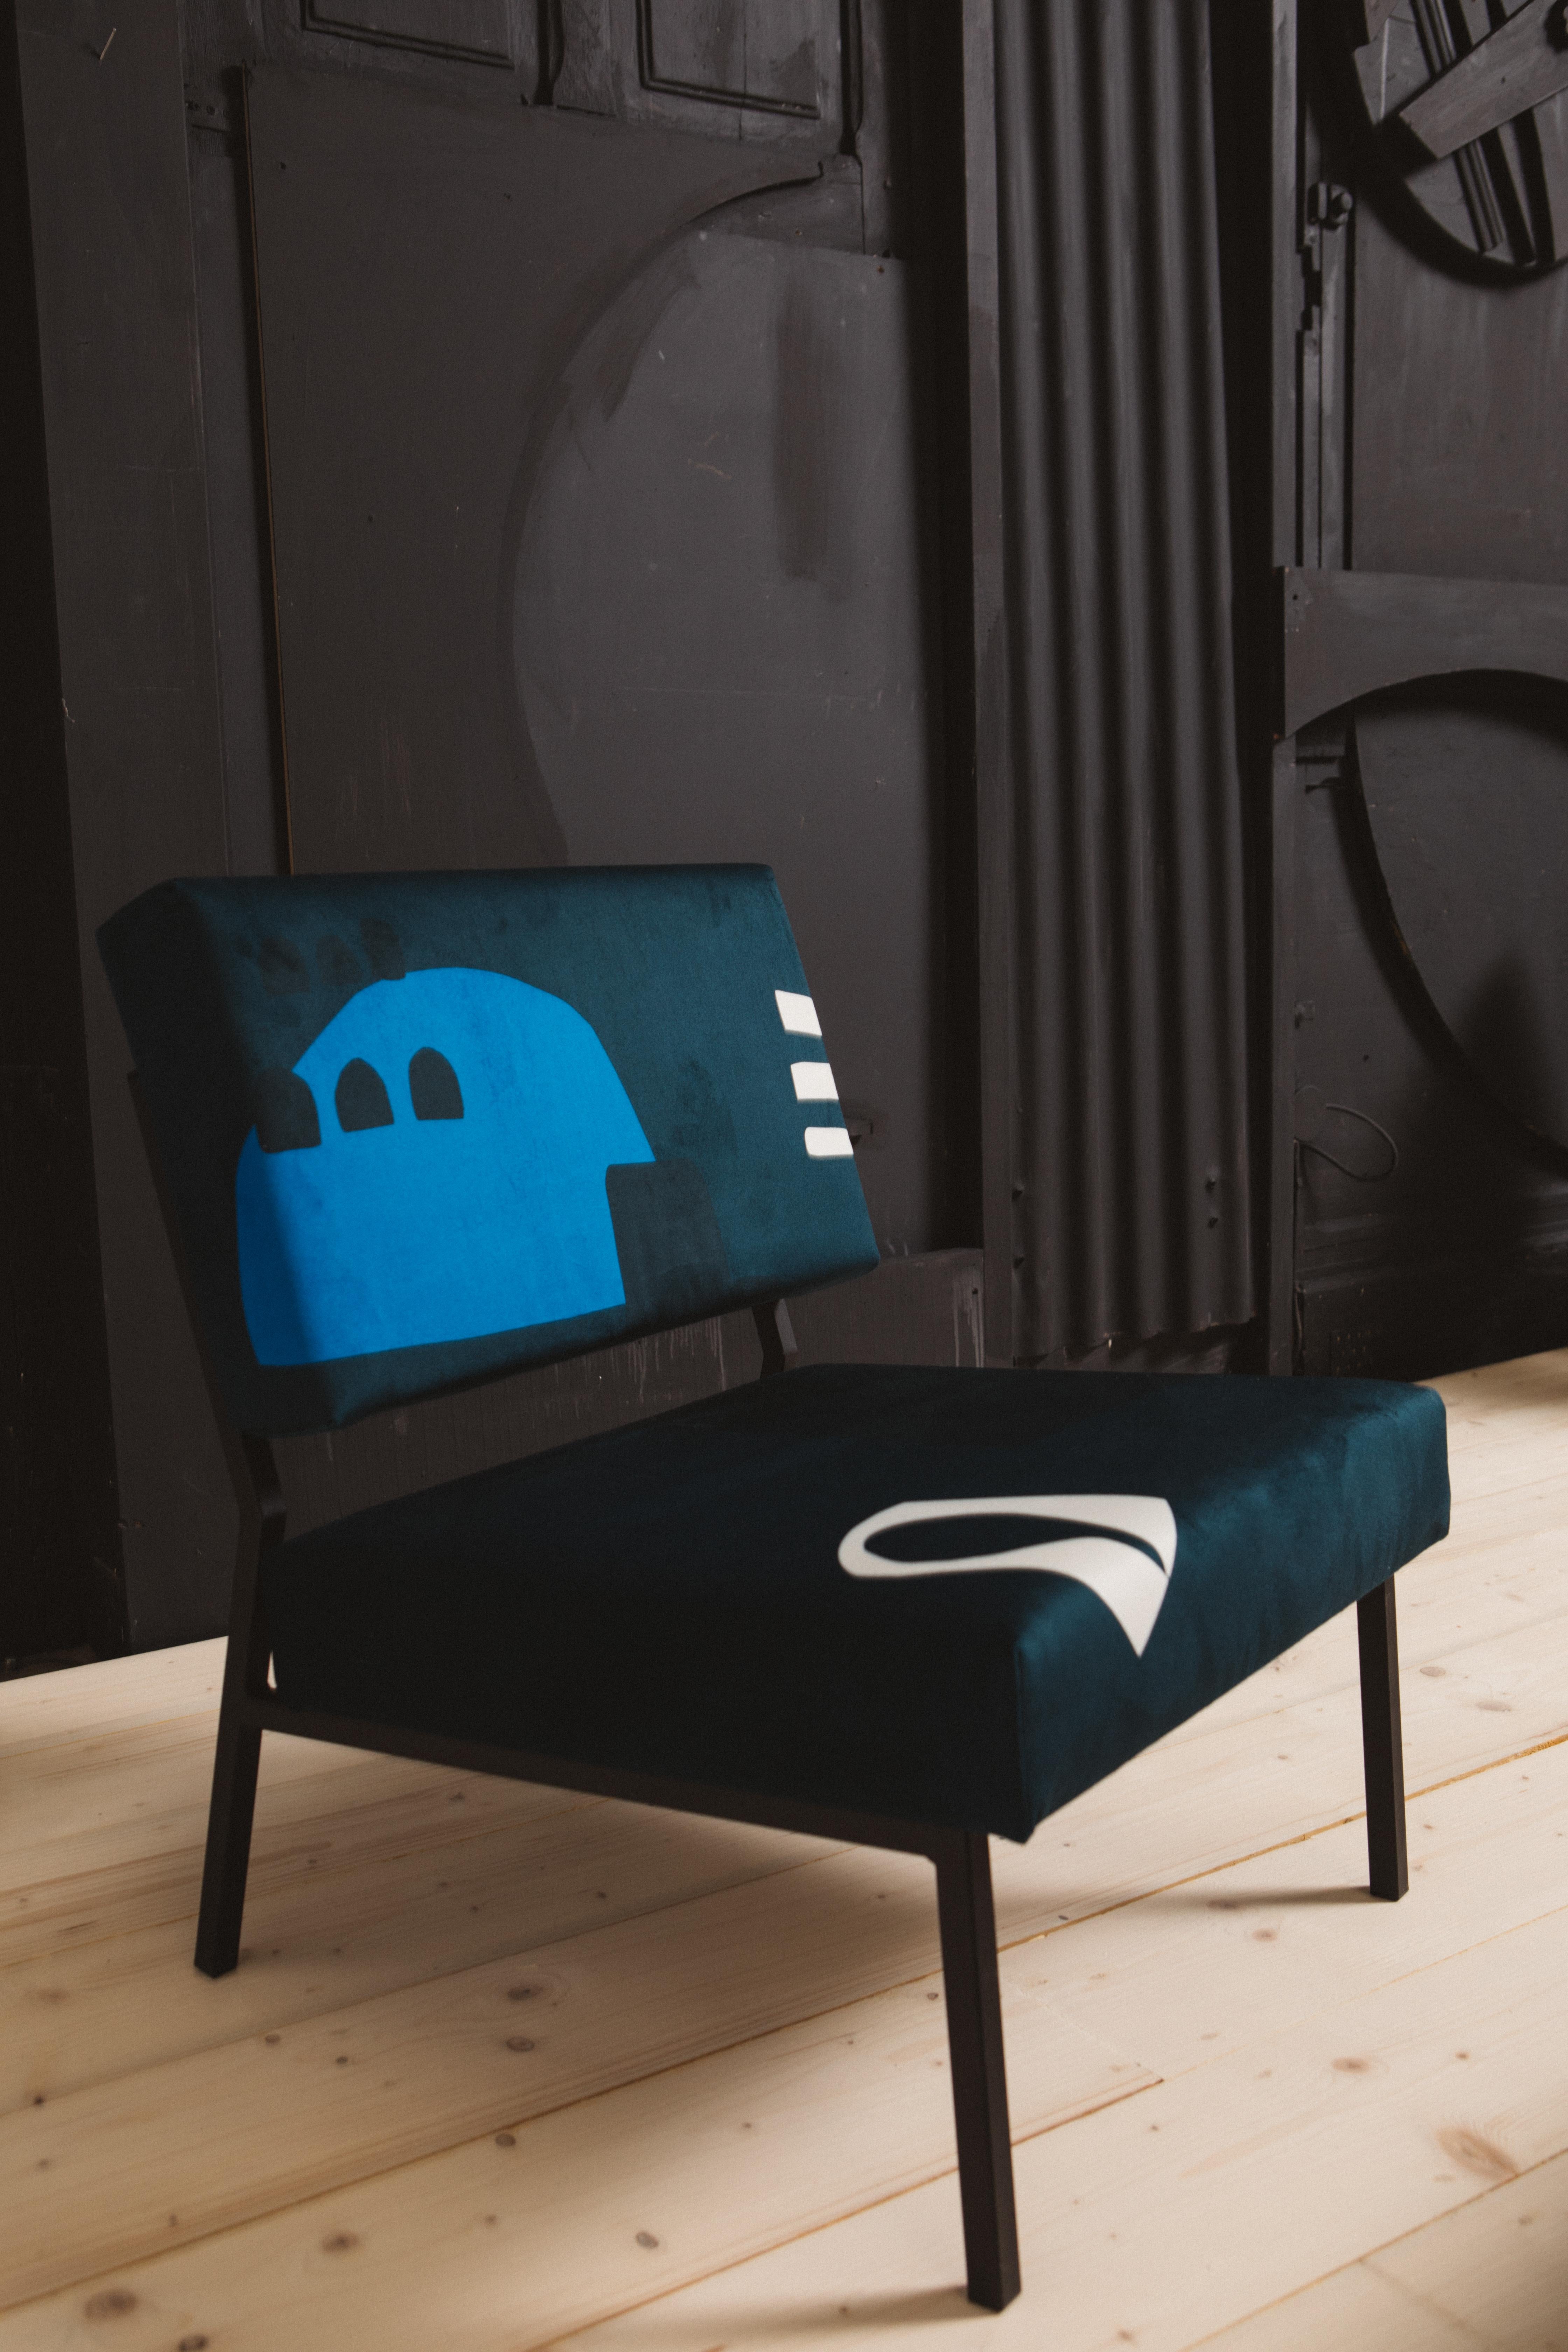 Babylone Blue O2 armchair by Babel Brune
Dimensions: D 63 x W 54 x H 67 cm, Seat H 35 cm.
Material: Suede velvet 380g / m², steel.

For the Armchair 02, we've taken a simple, elegant chair structure and brought it to life with bold Babel Brune